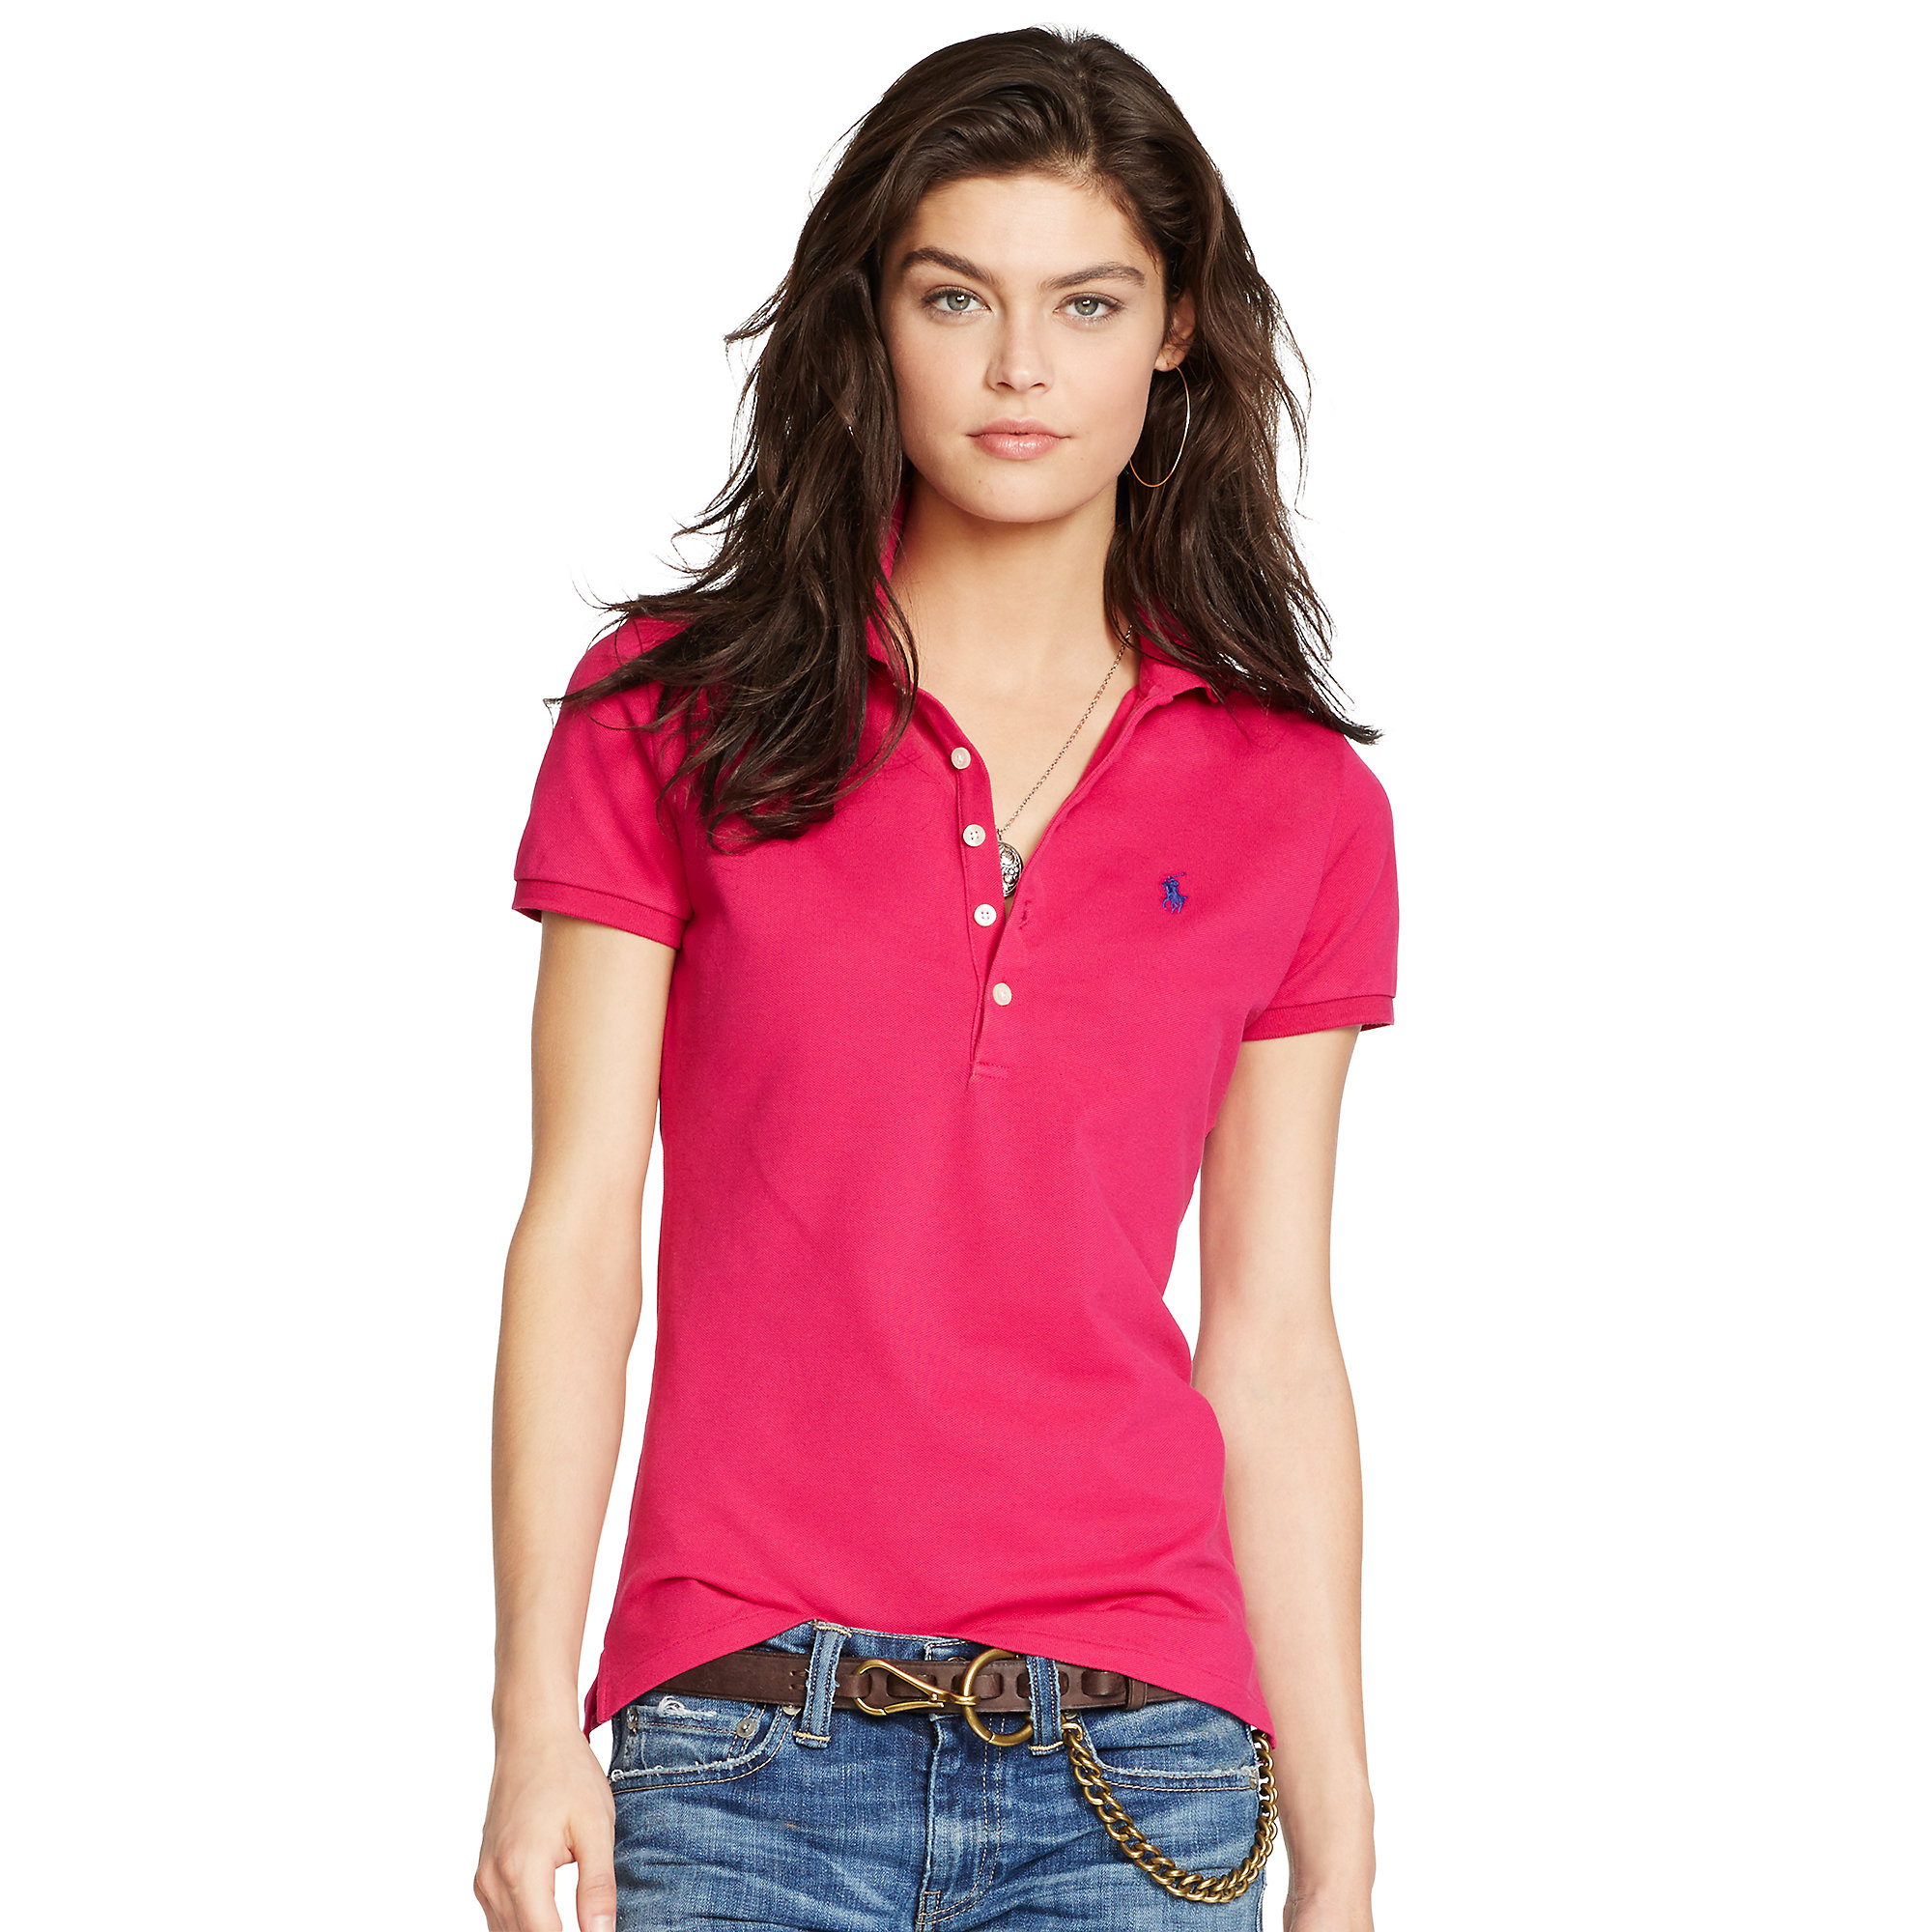 Lyst - Polo Ralph Lauren Skinny Stretch Polo Shirt in Pink